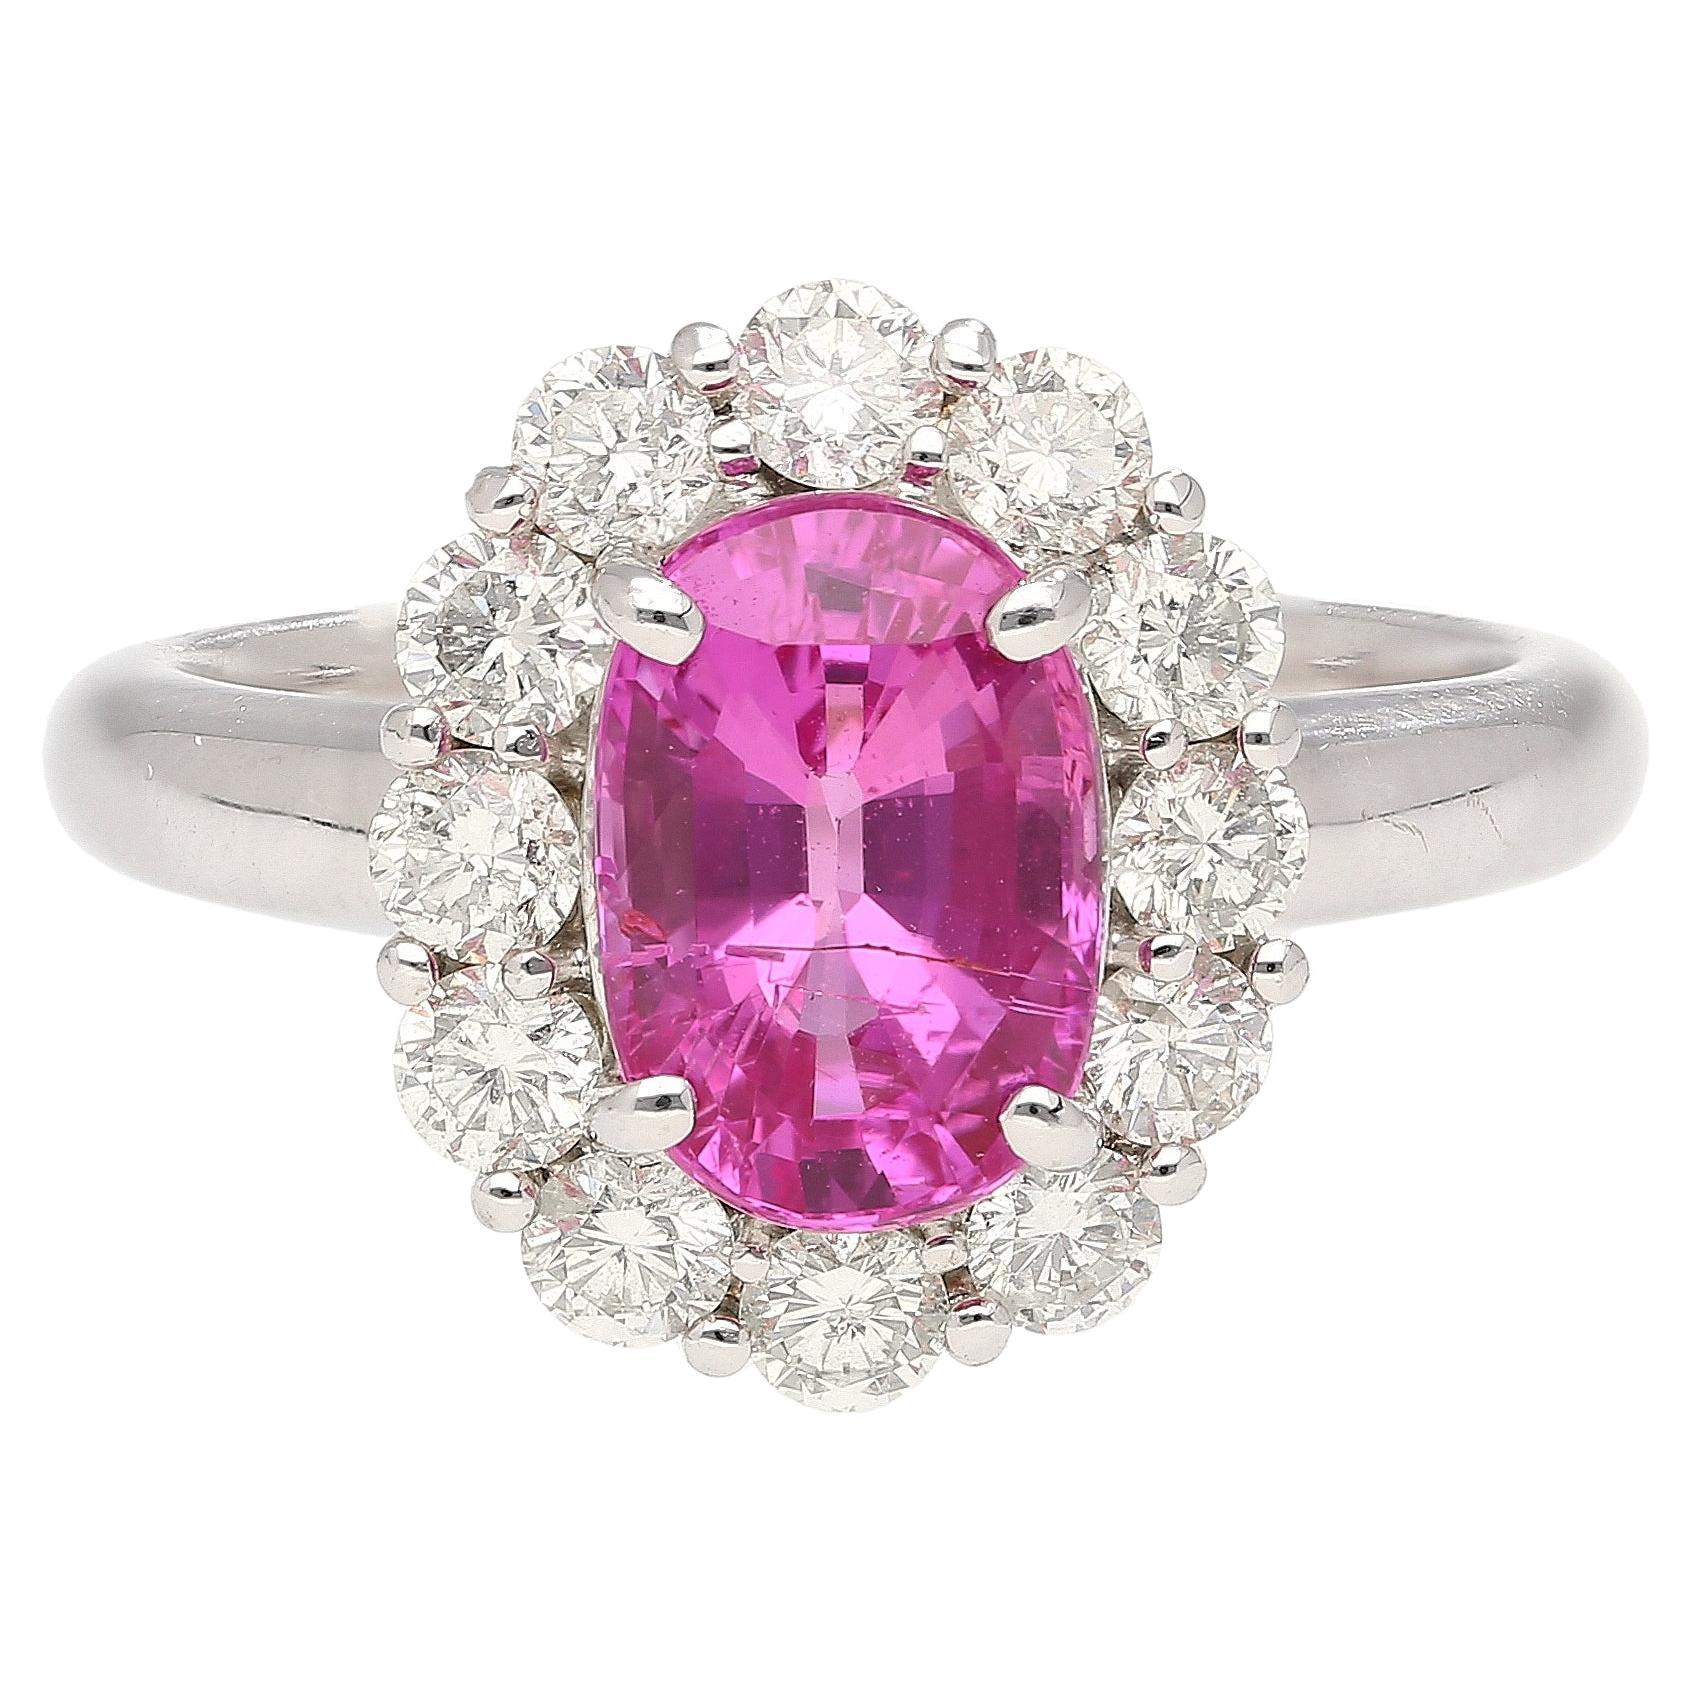 3.96 Carat Oval Cut Pink Sapphire and Diamond Halo Ring in 18k White Gold For Sale